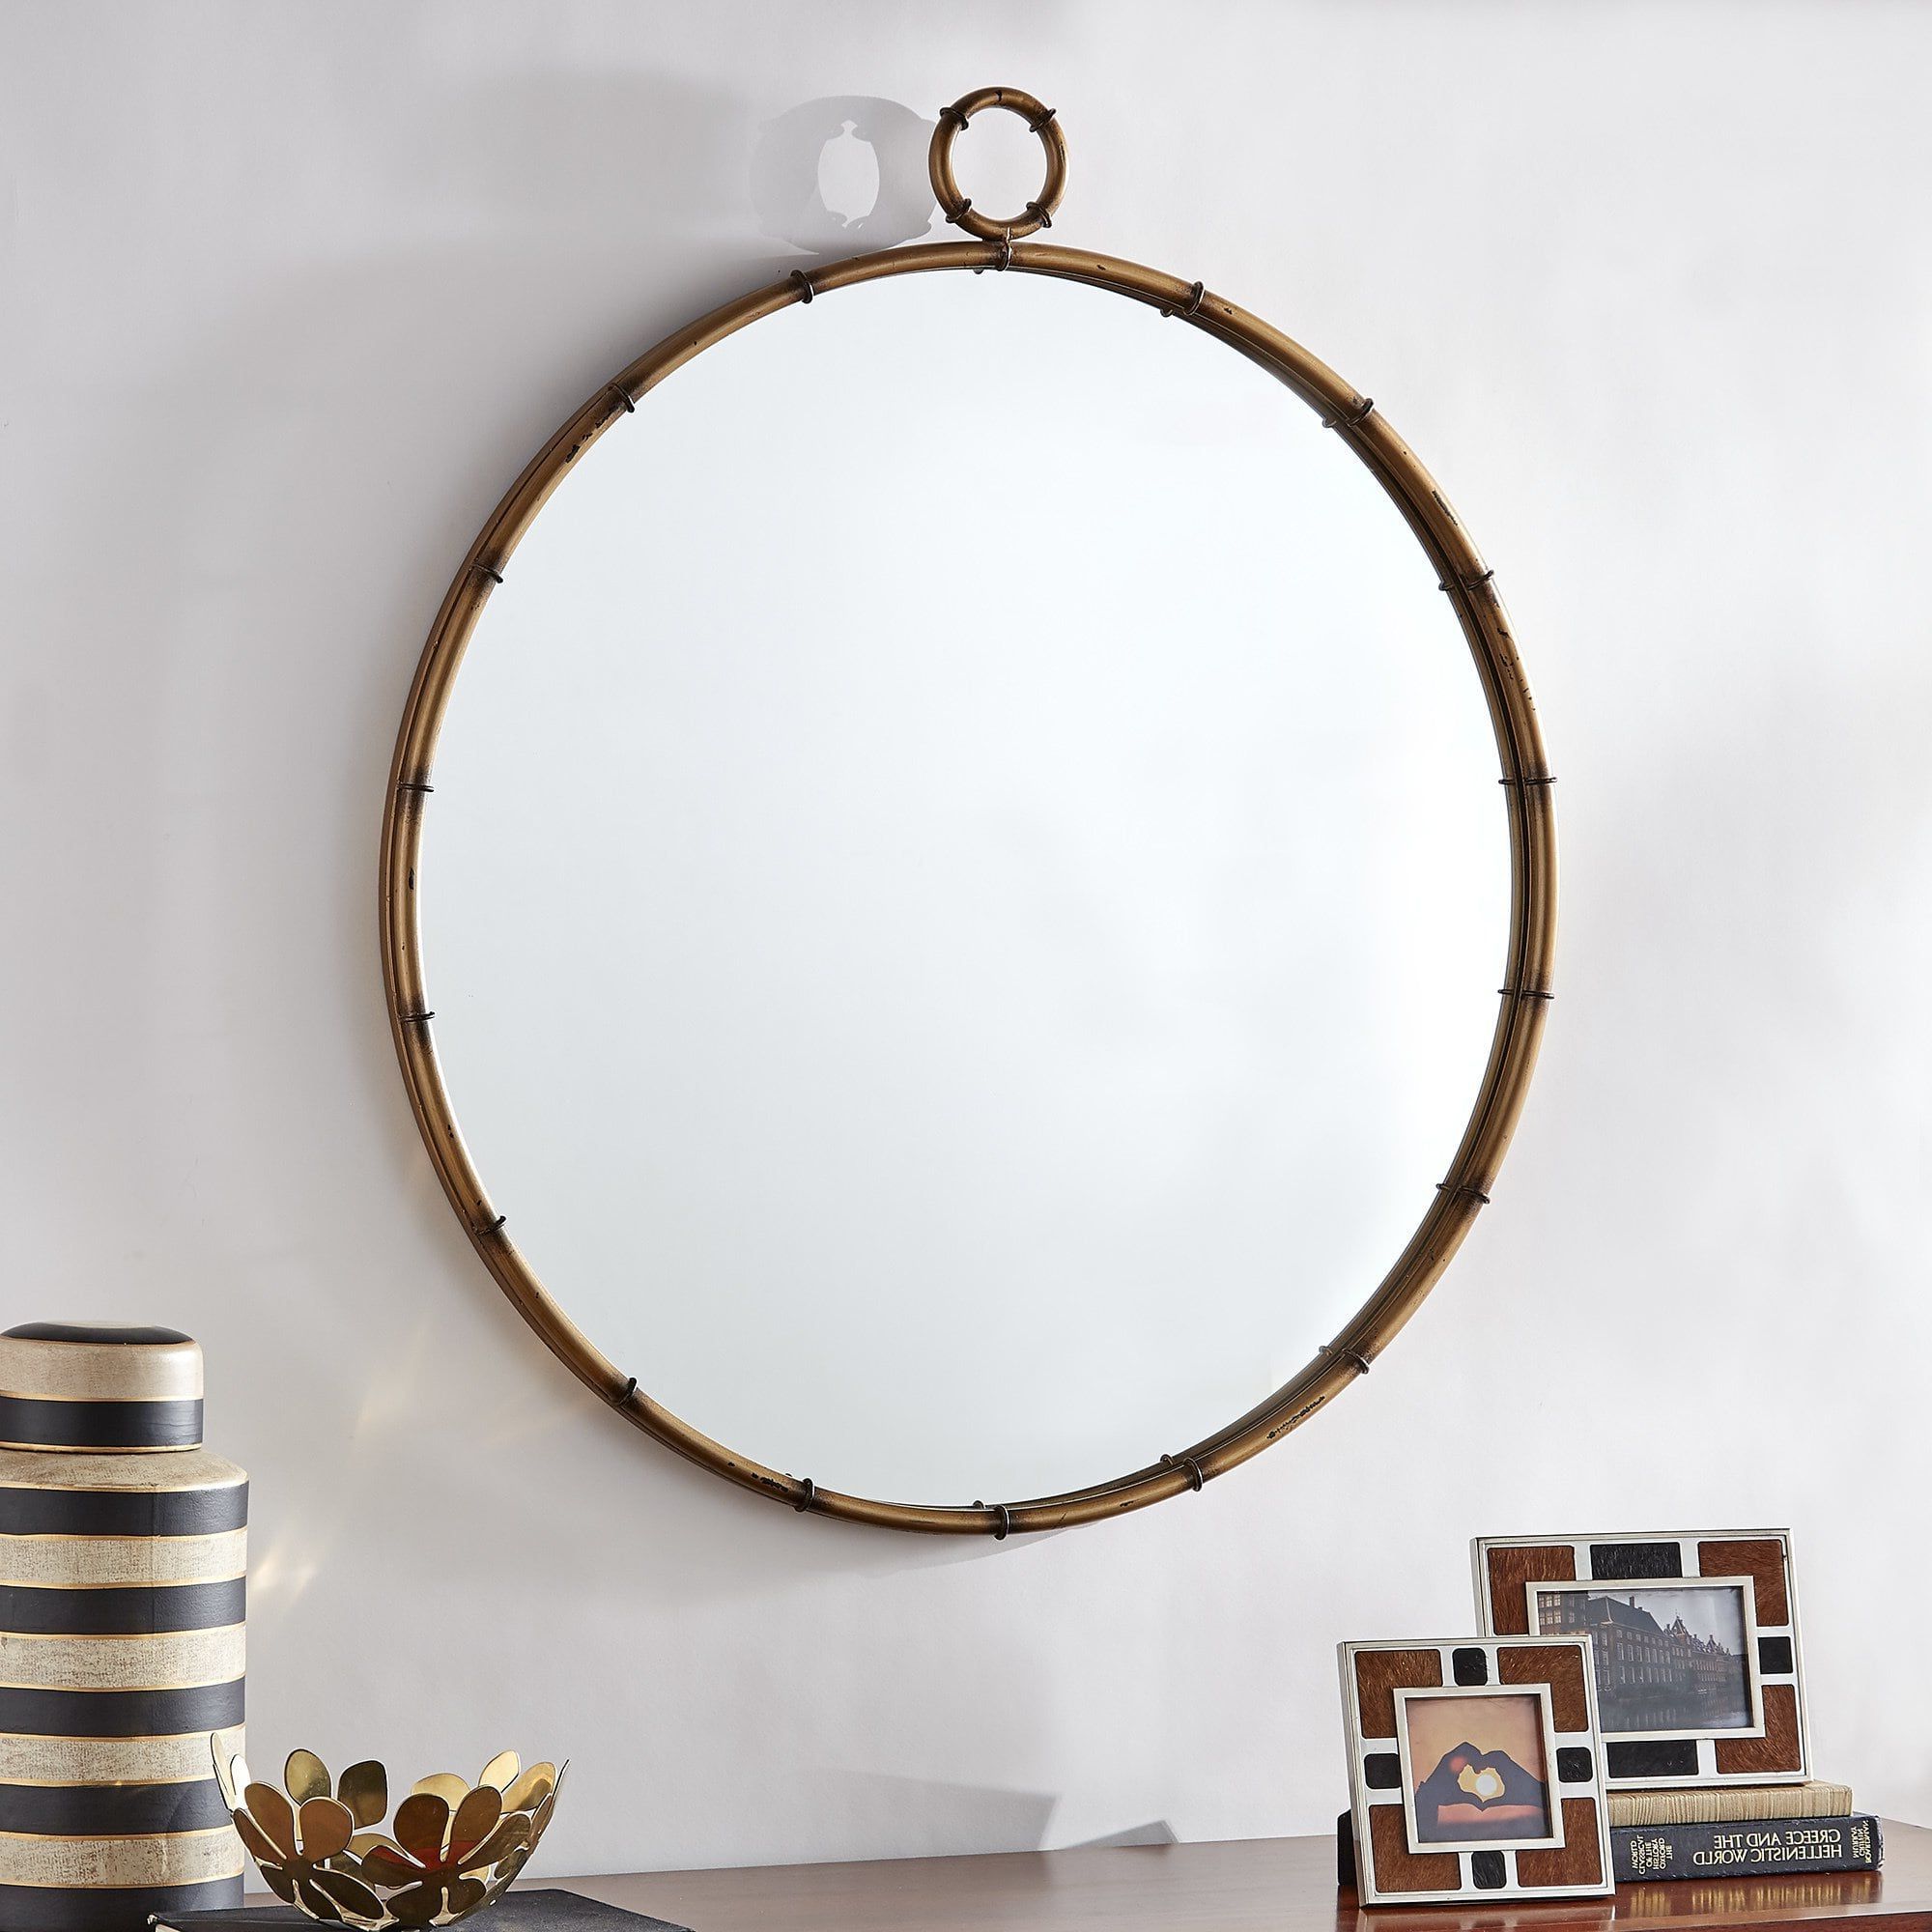 Newest Marza Antiqued Brass Finish Round Wall Mirror With Decorative Ring Intended For Woven Metal Round Wall Mirrors (View 6 of 15)